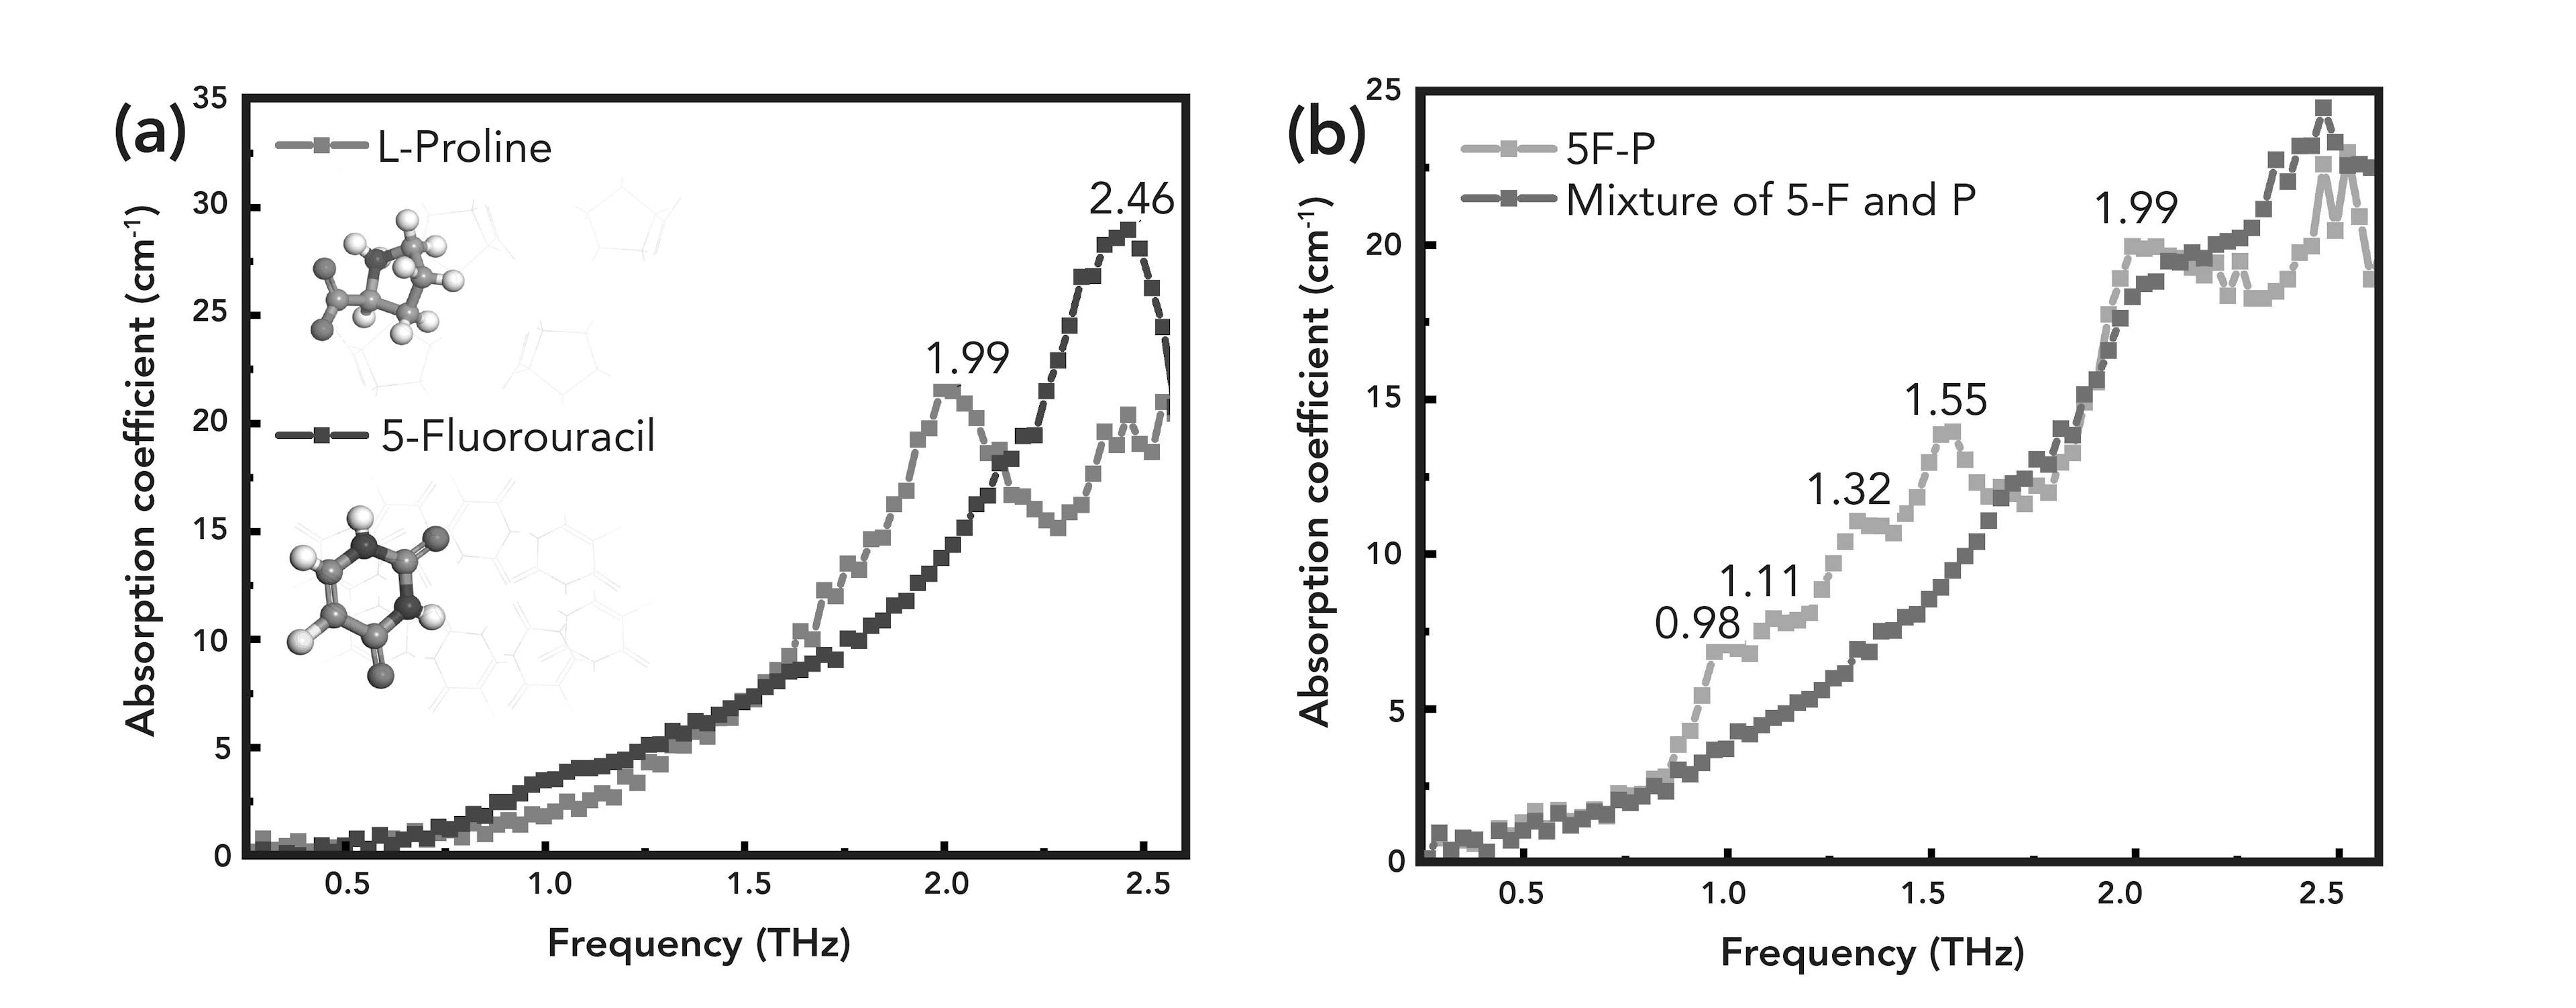 FIGURE 3: The THz absorption spectra of (a) Pro, 5-FU. (b) The THz absorption spectra of co-crystal and mixture.